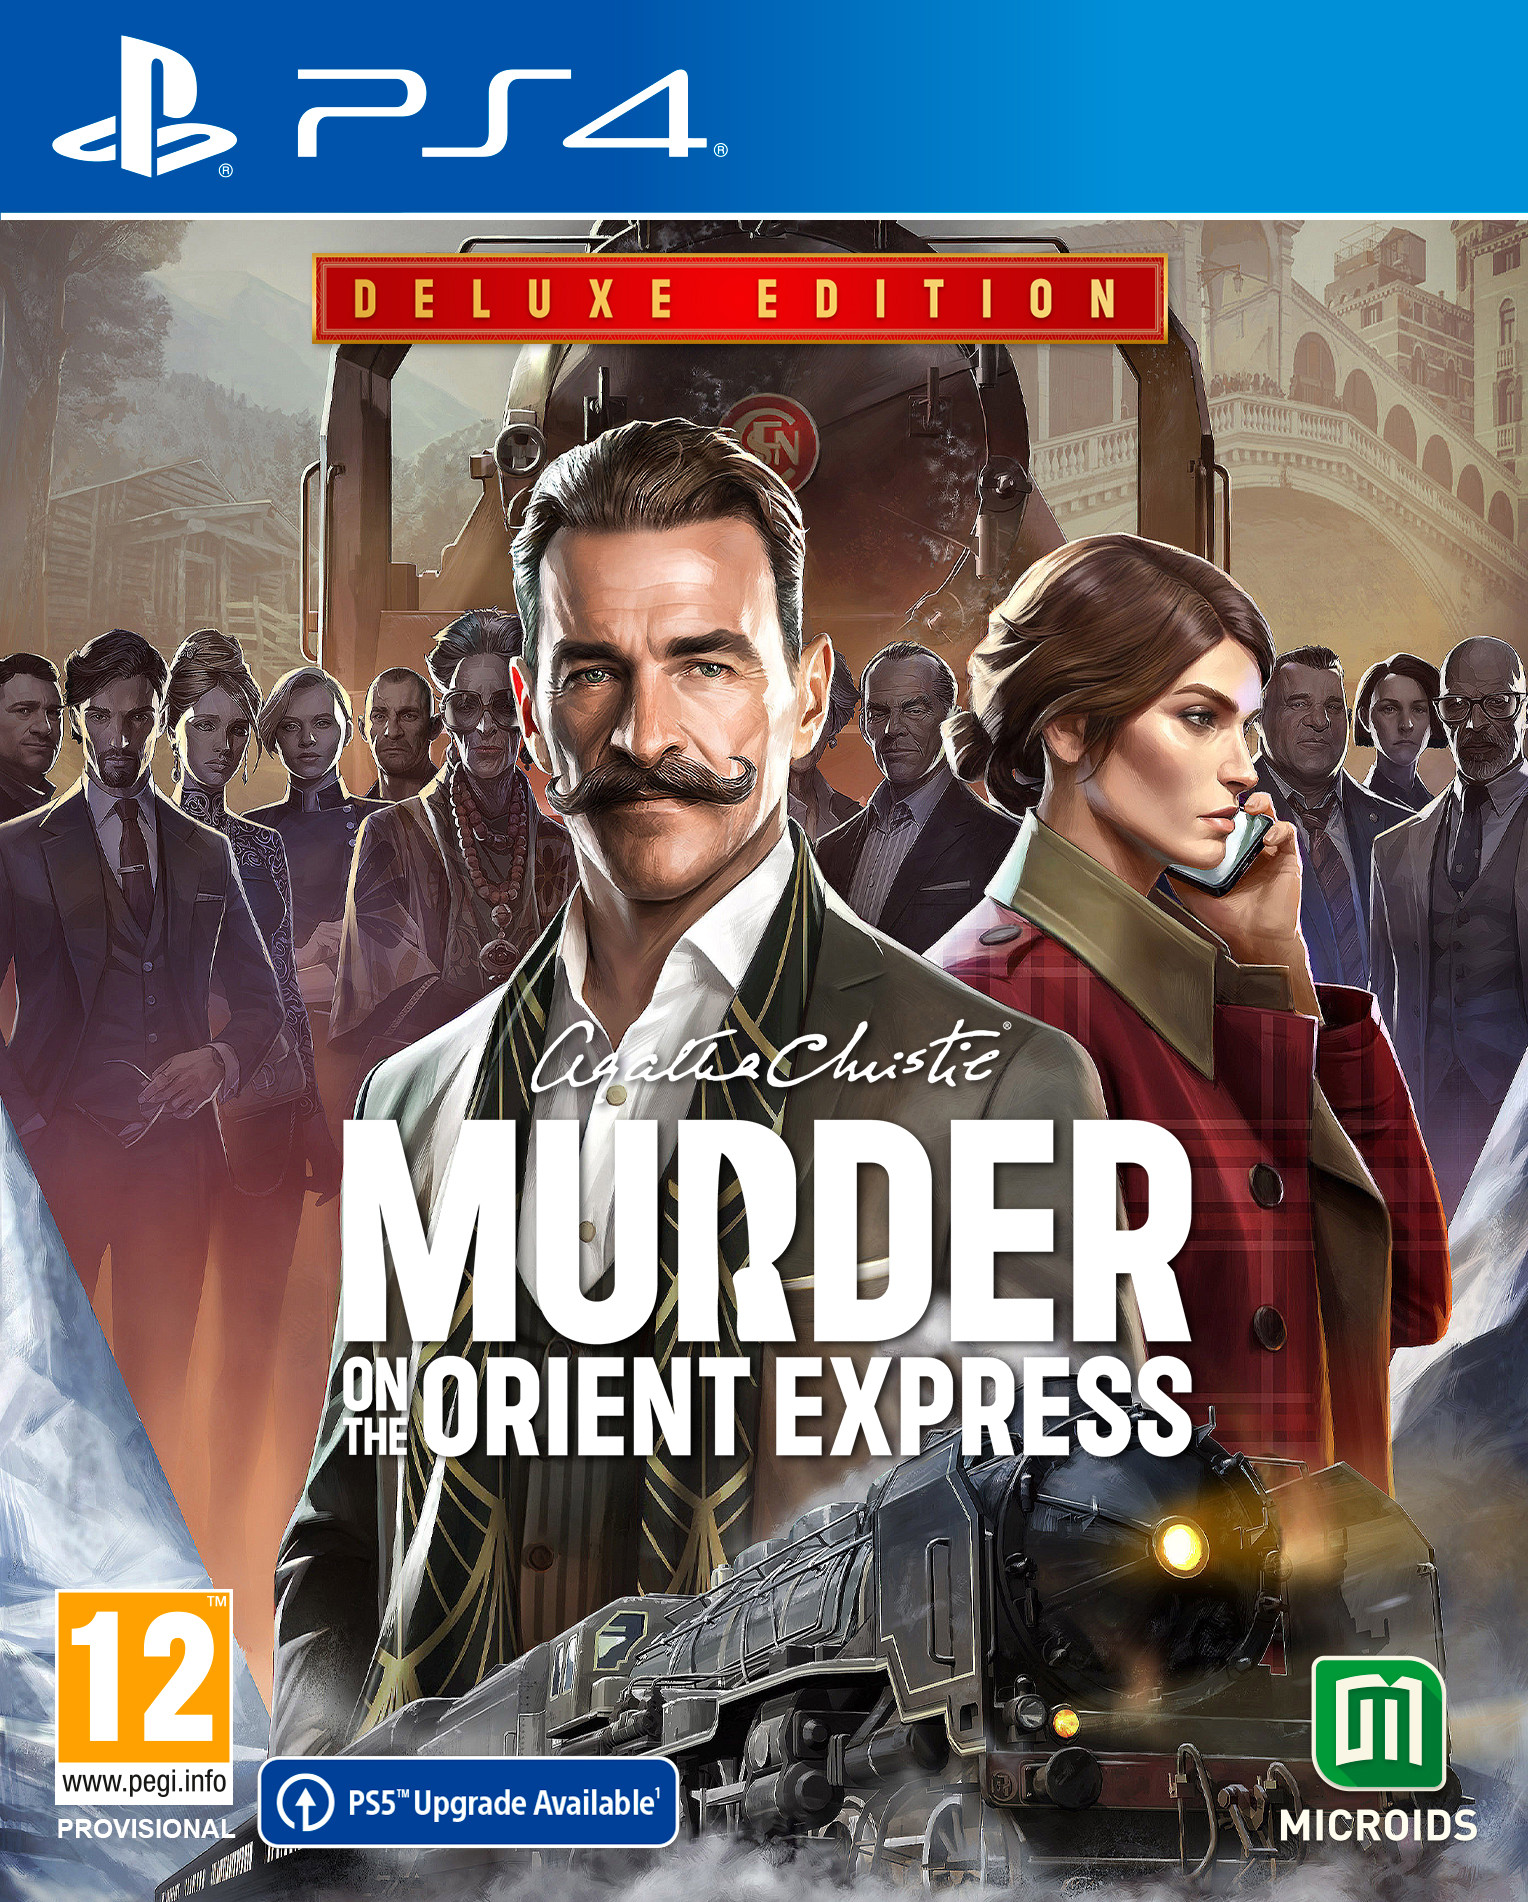 Agatha Christie: Murder on the Orient Express - Deluxe Edition (PS4), Microids